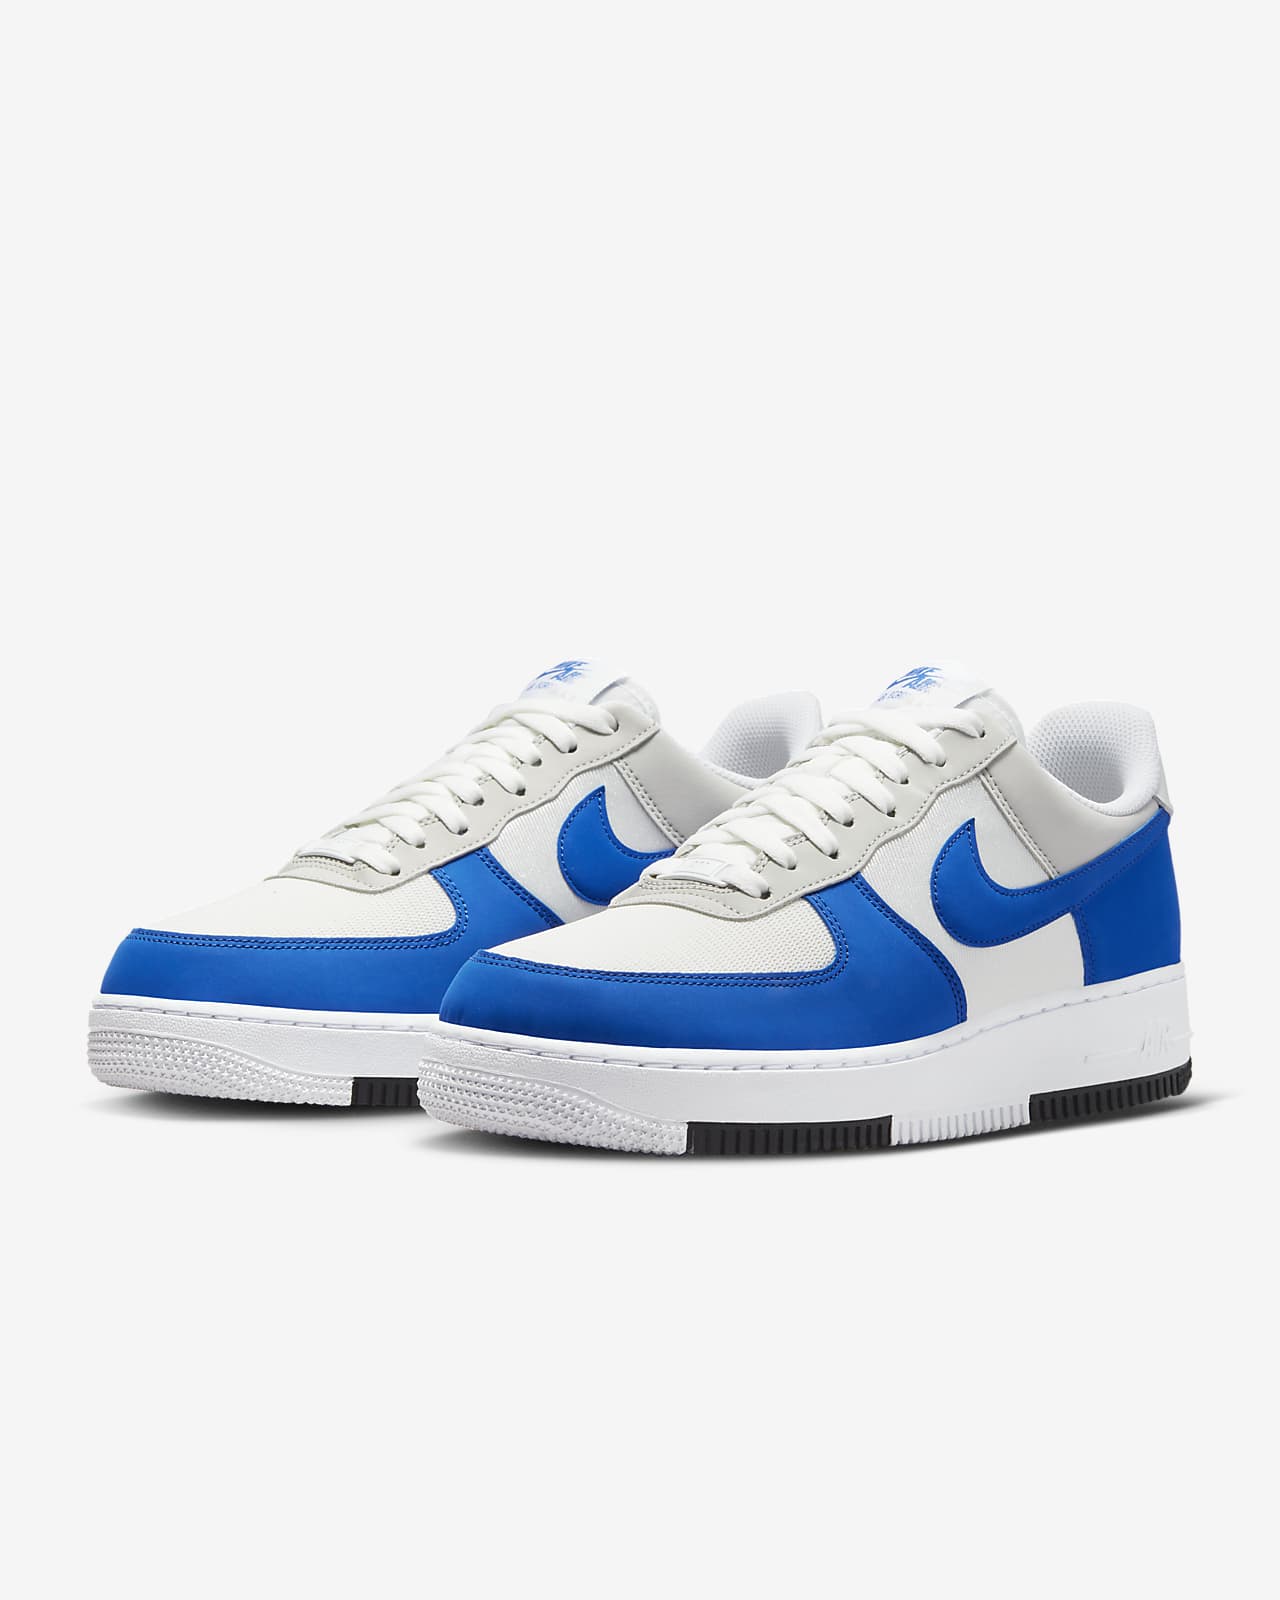 NIKE AIRFORCE1 LOW 07 LV8 22